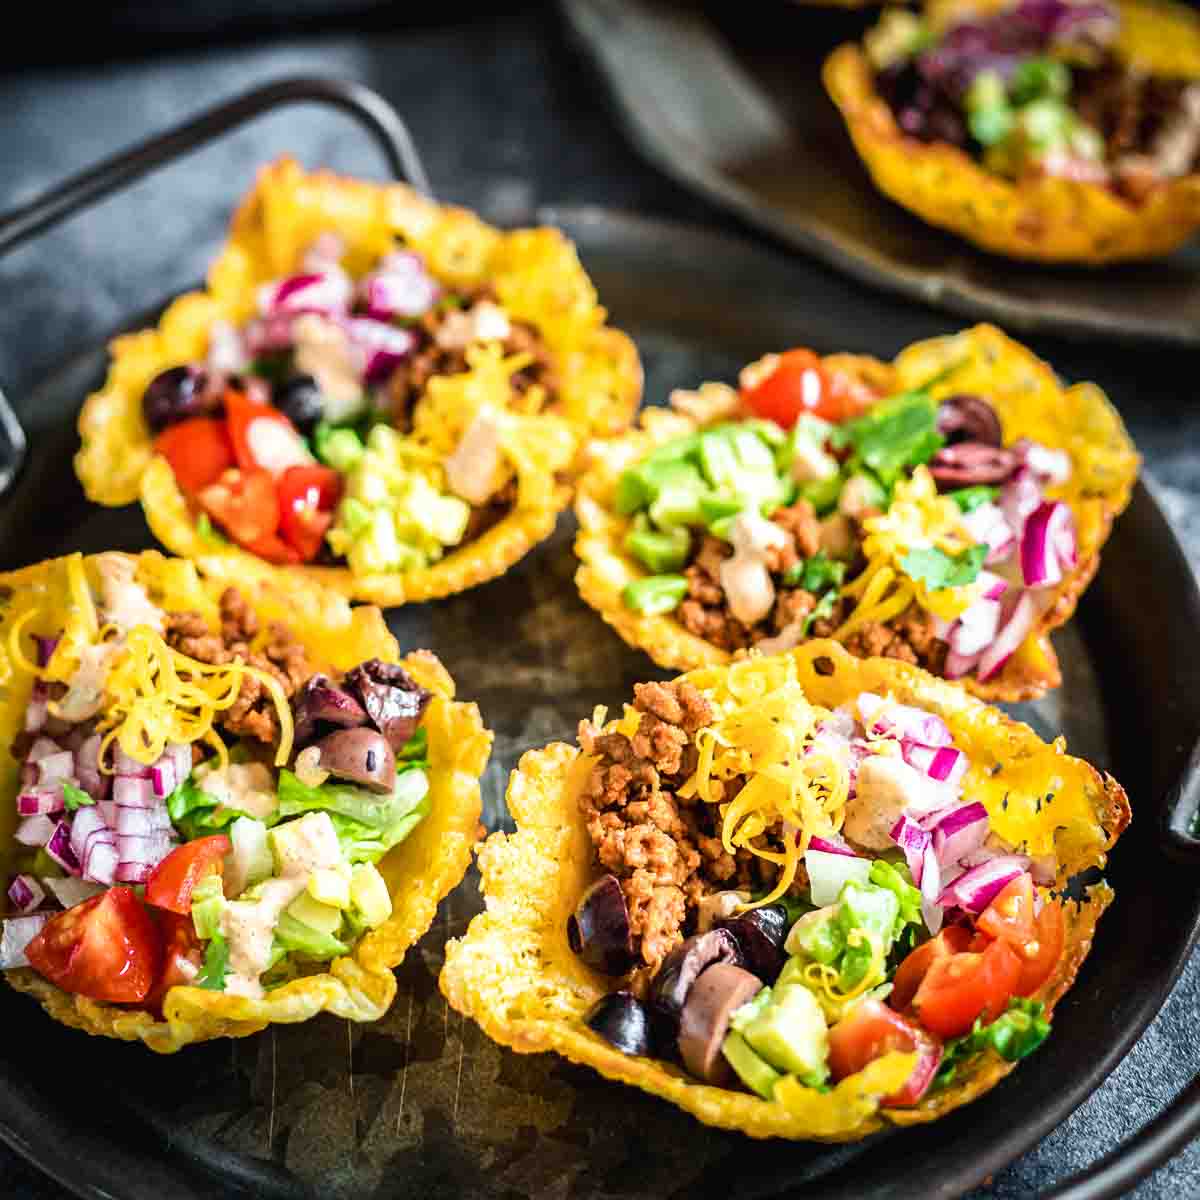 Keto Taco Recipe served as an appetizer on a black plate